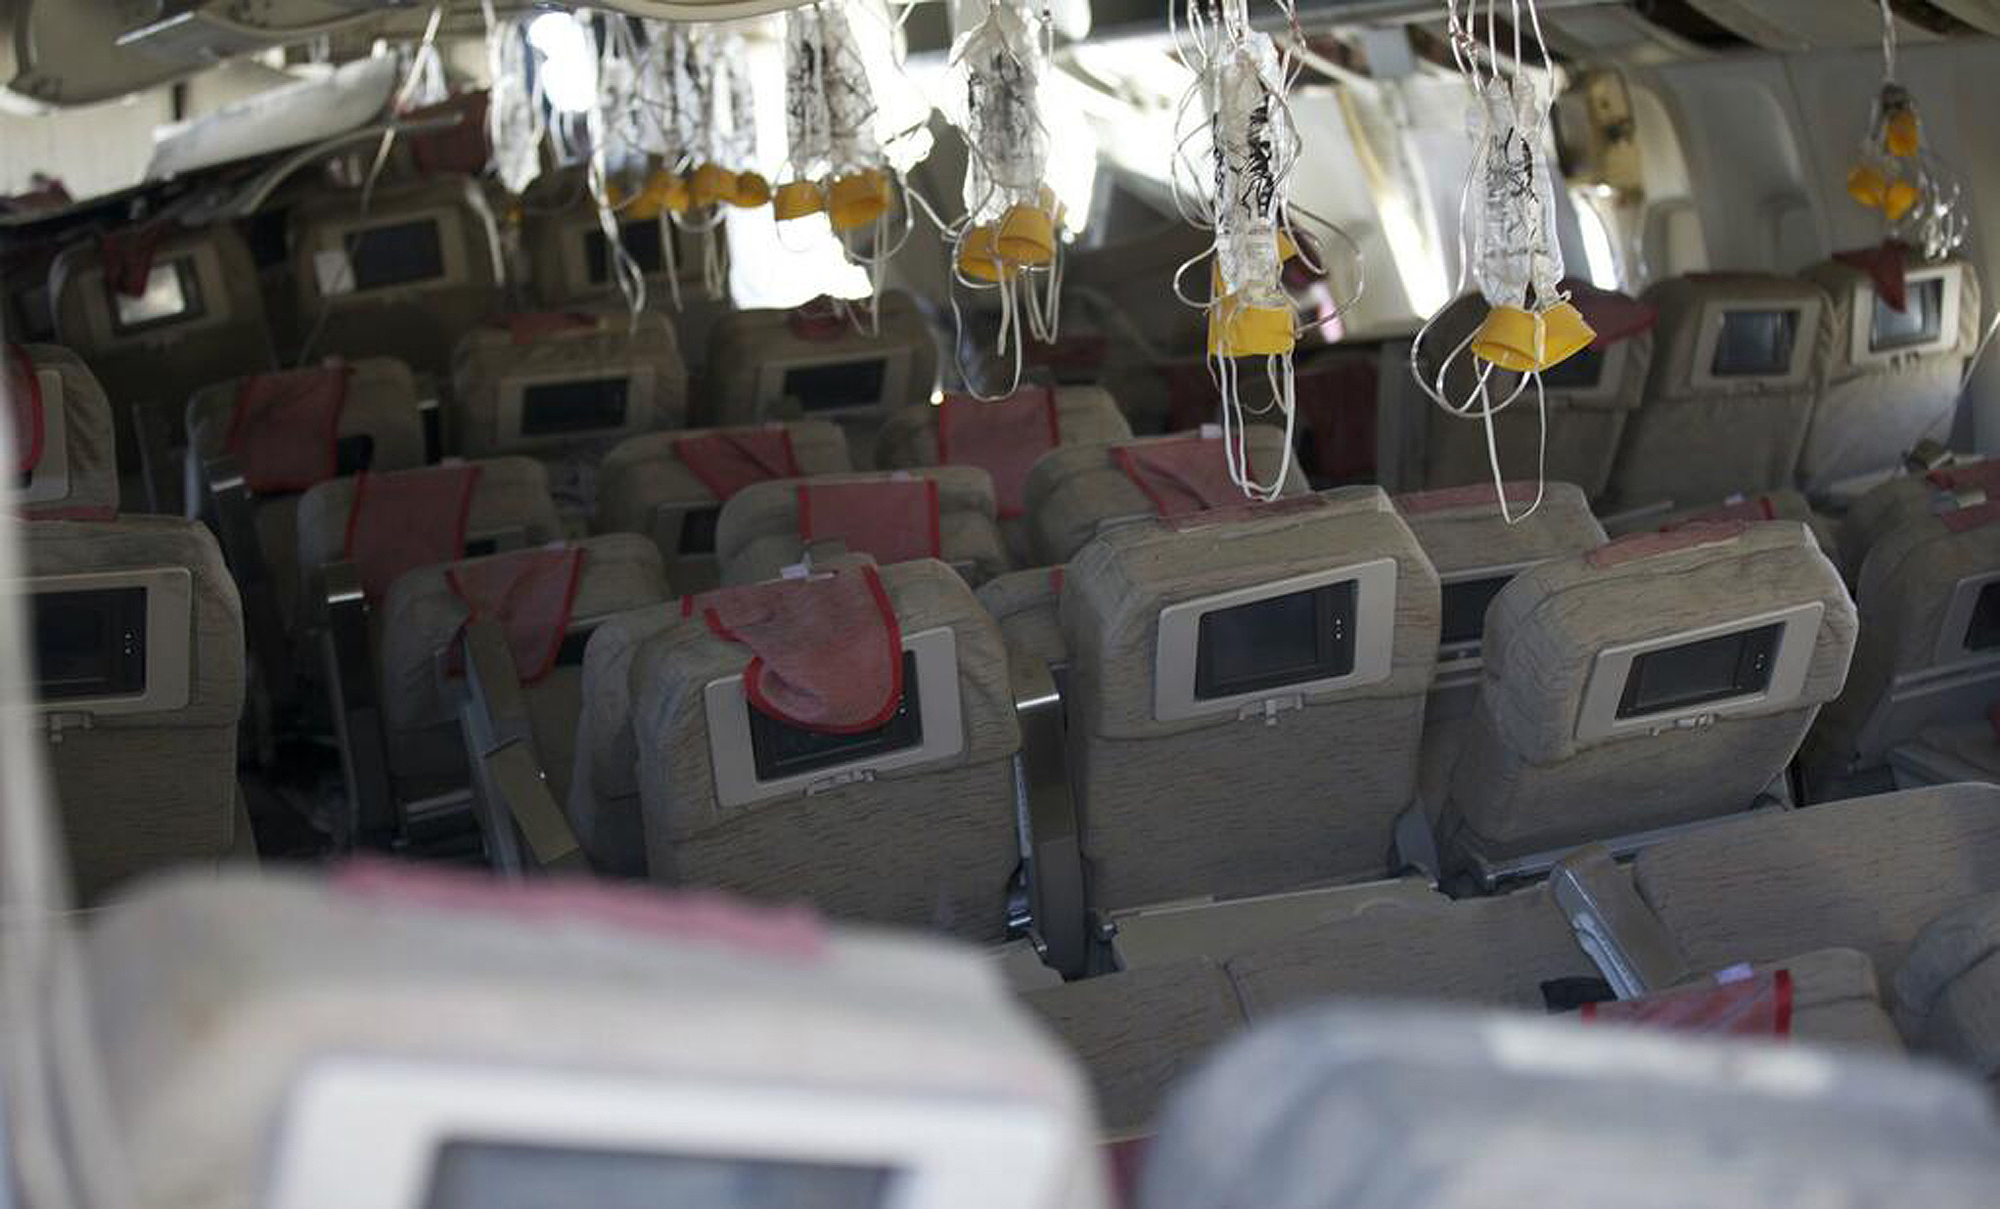 The interior of the aircraft after the crash. Photo: EPA